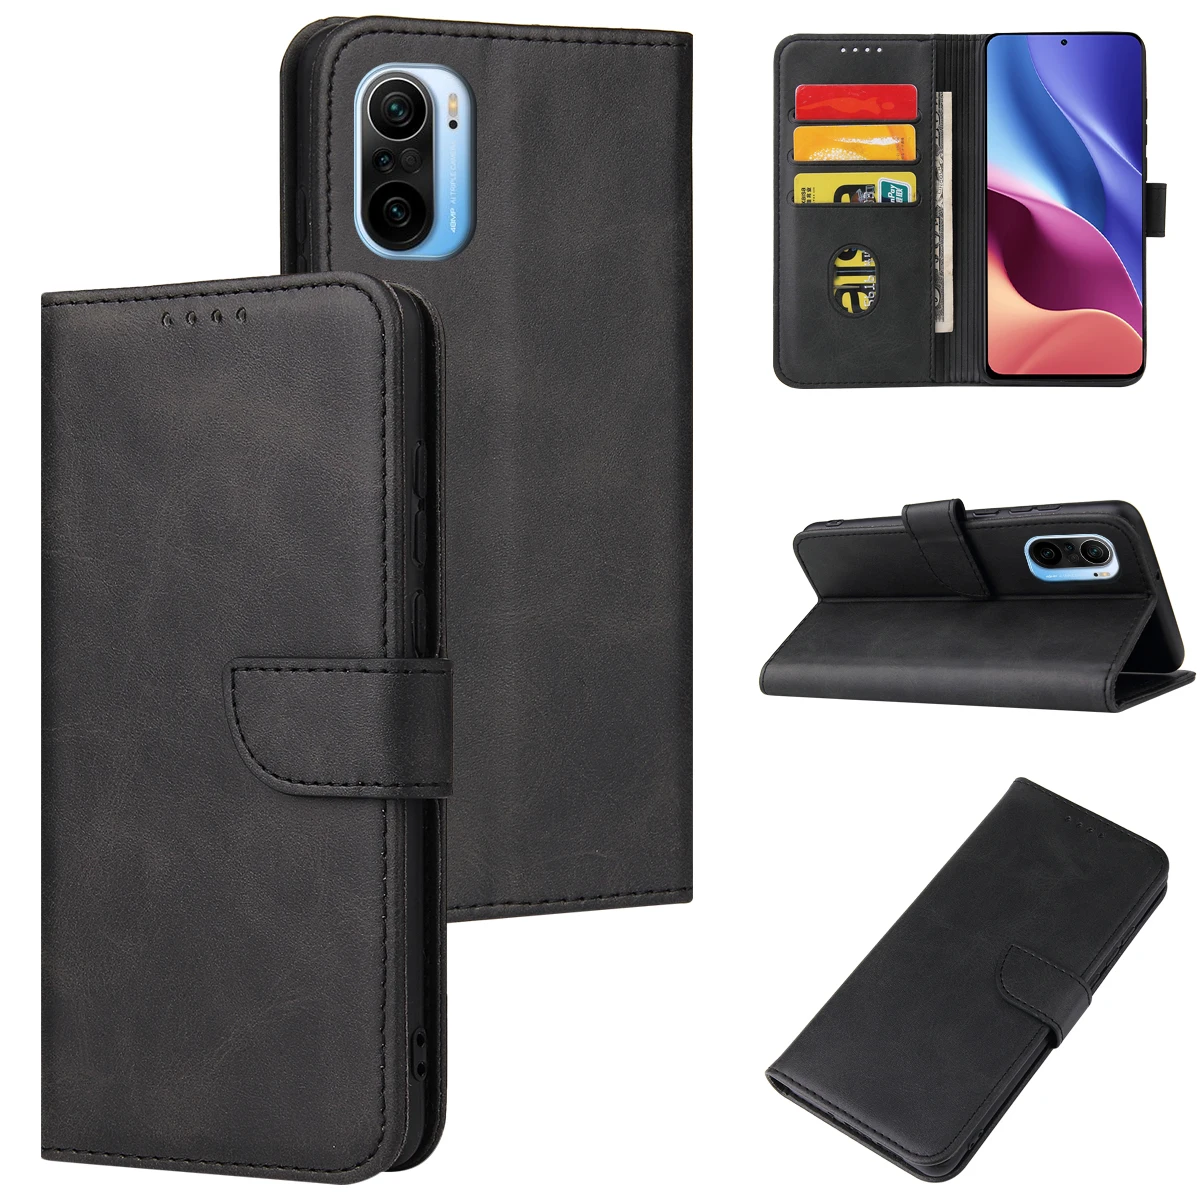 

Xiaomi5 Case Wallet Flip Cover Leather Case for Xiaomi Mi5 Mi 5 5s plus Mi5s plus Pu Leather Phone Bags Holster Fundas Coque